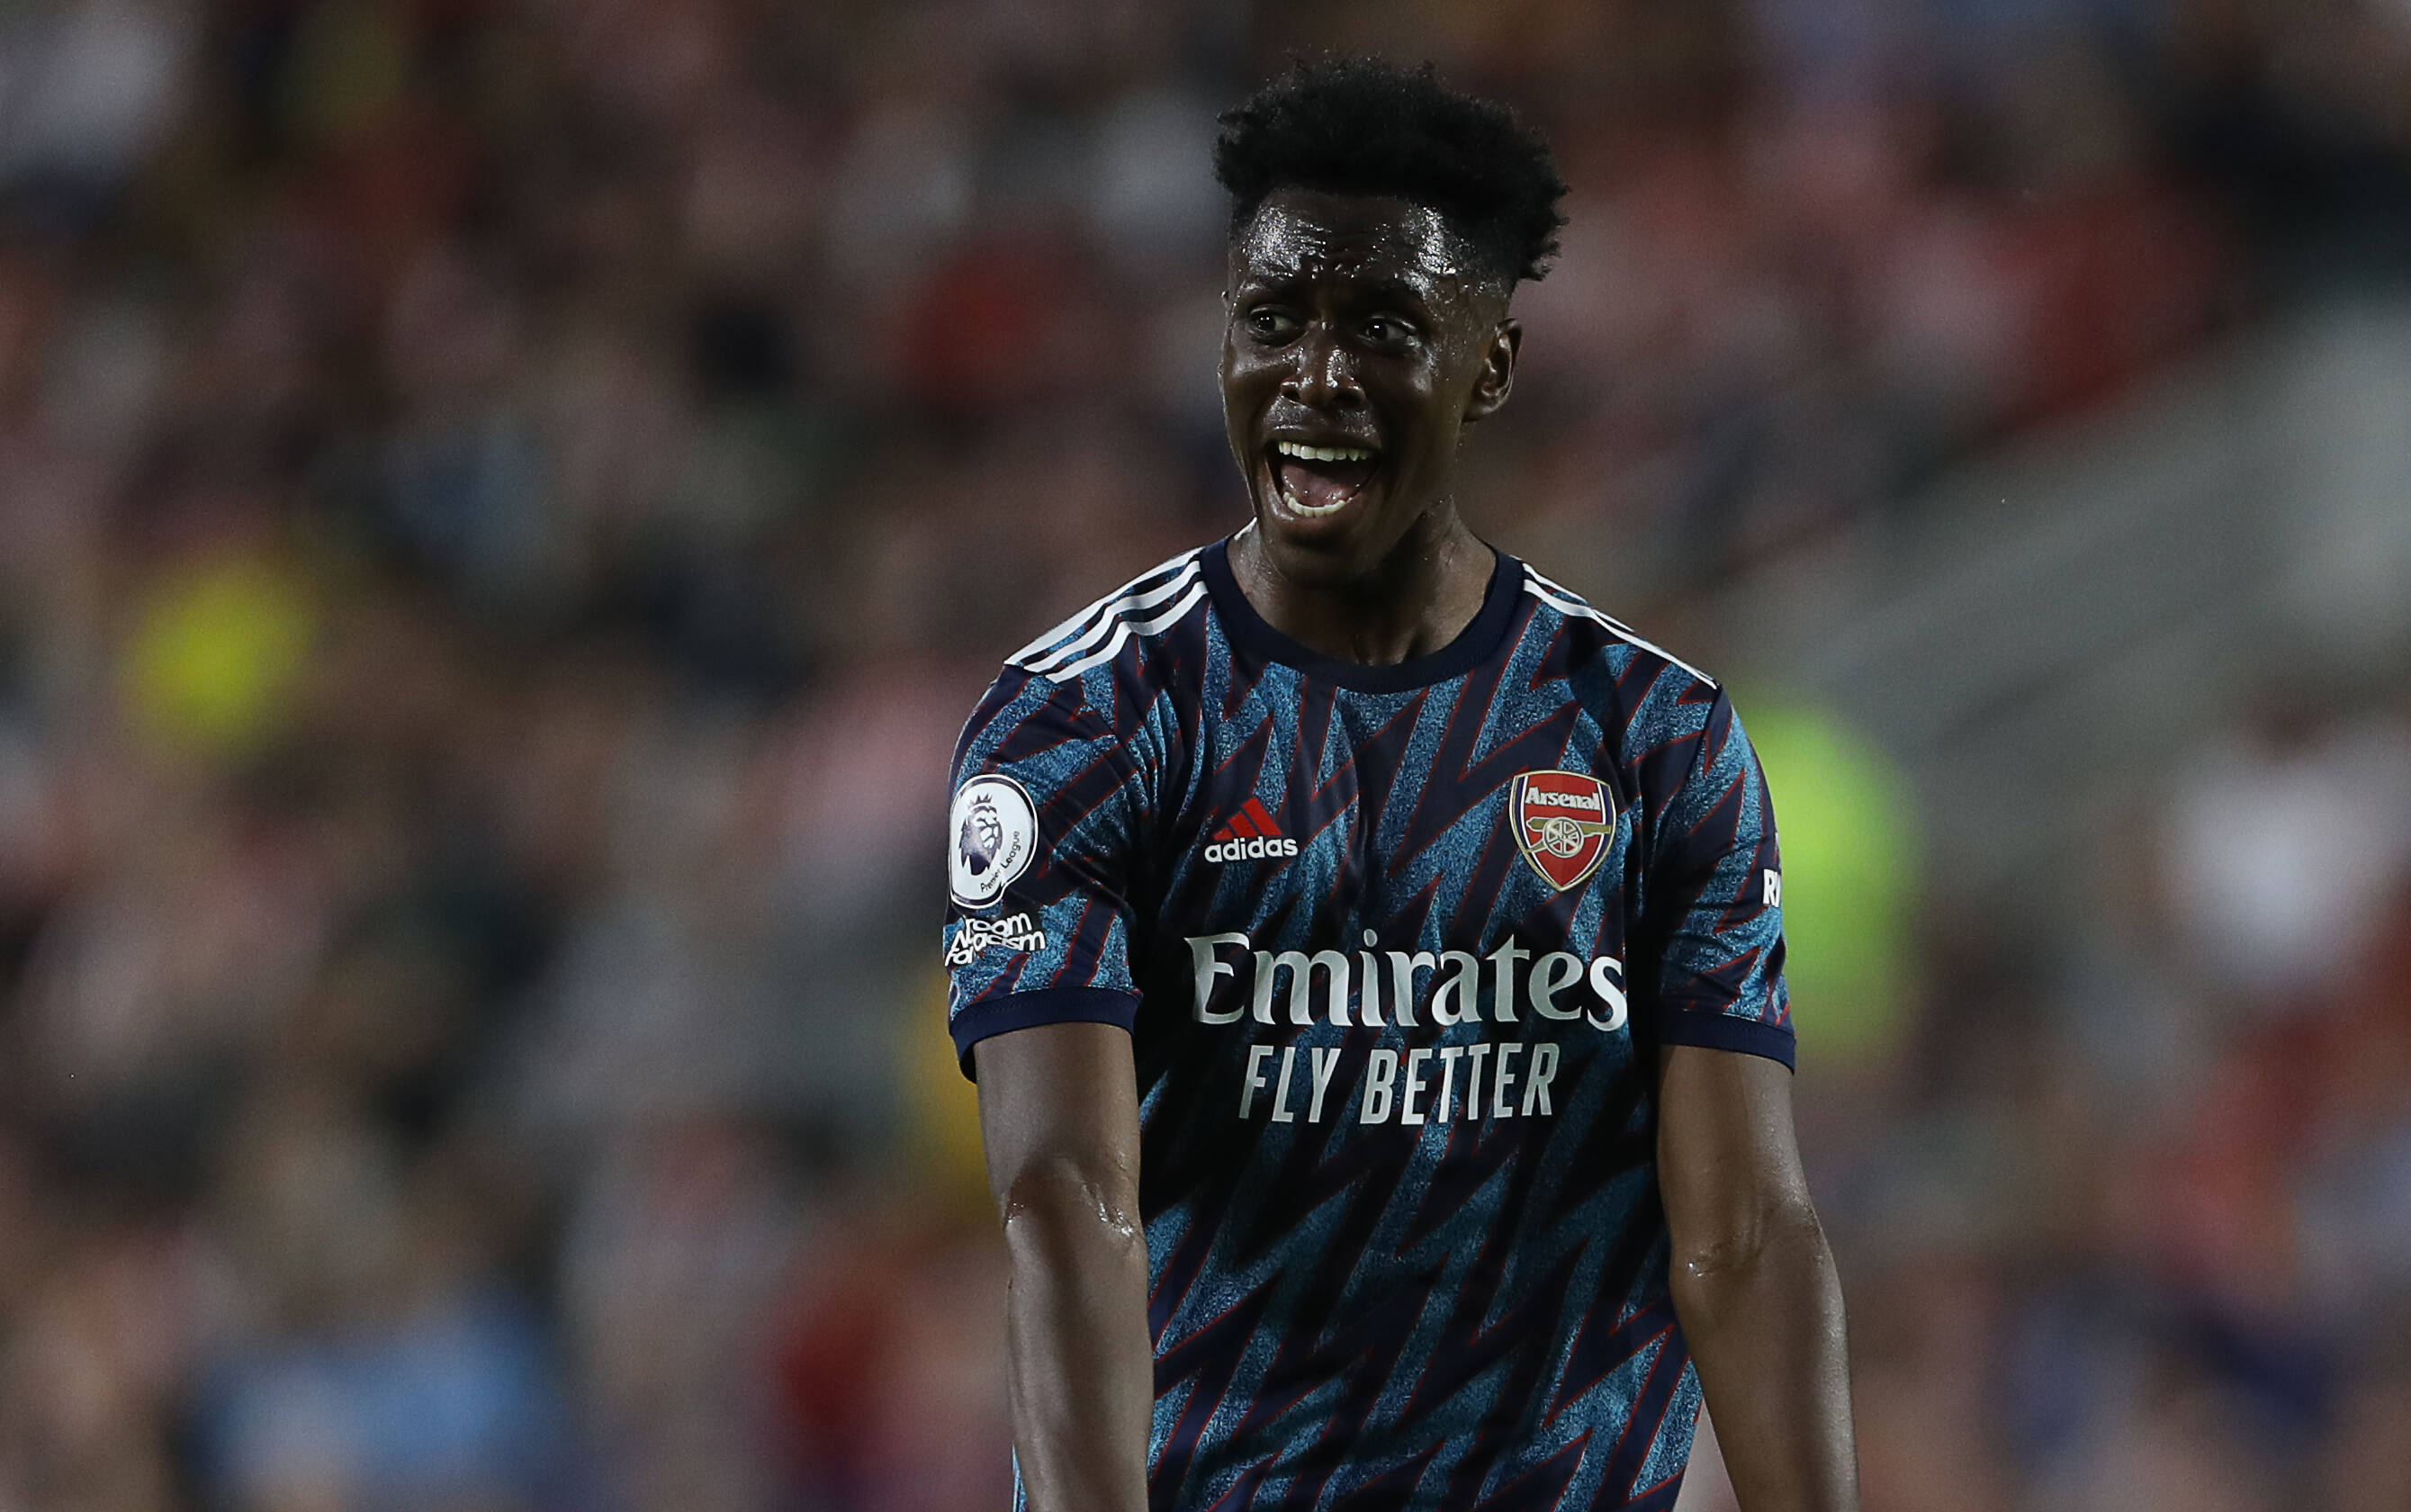 Arsenal in talks to loan out 23-year-old, deal could include buy option